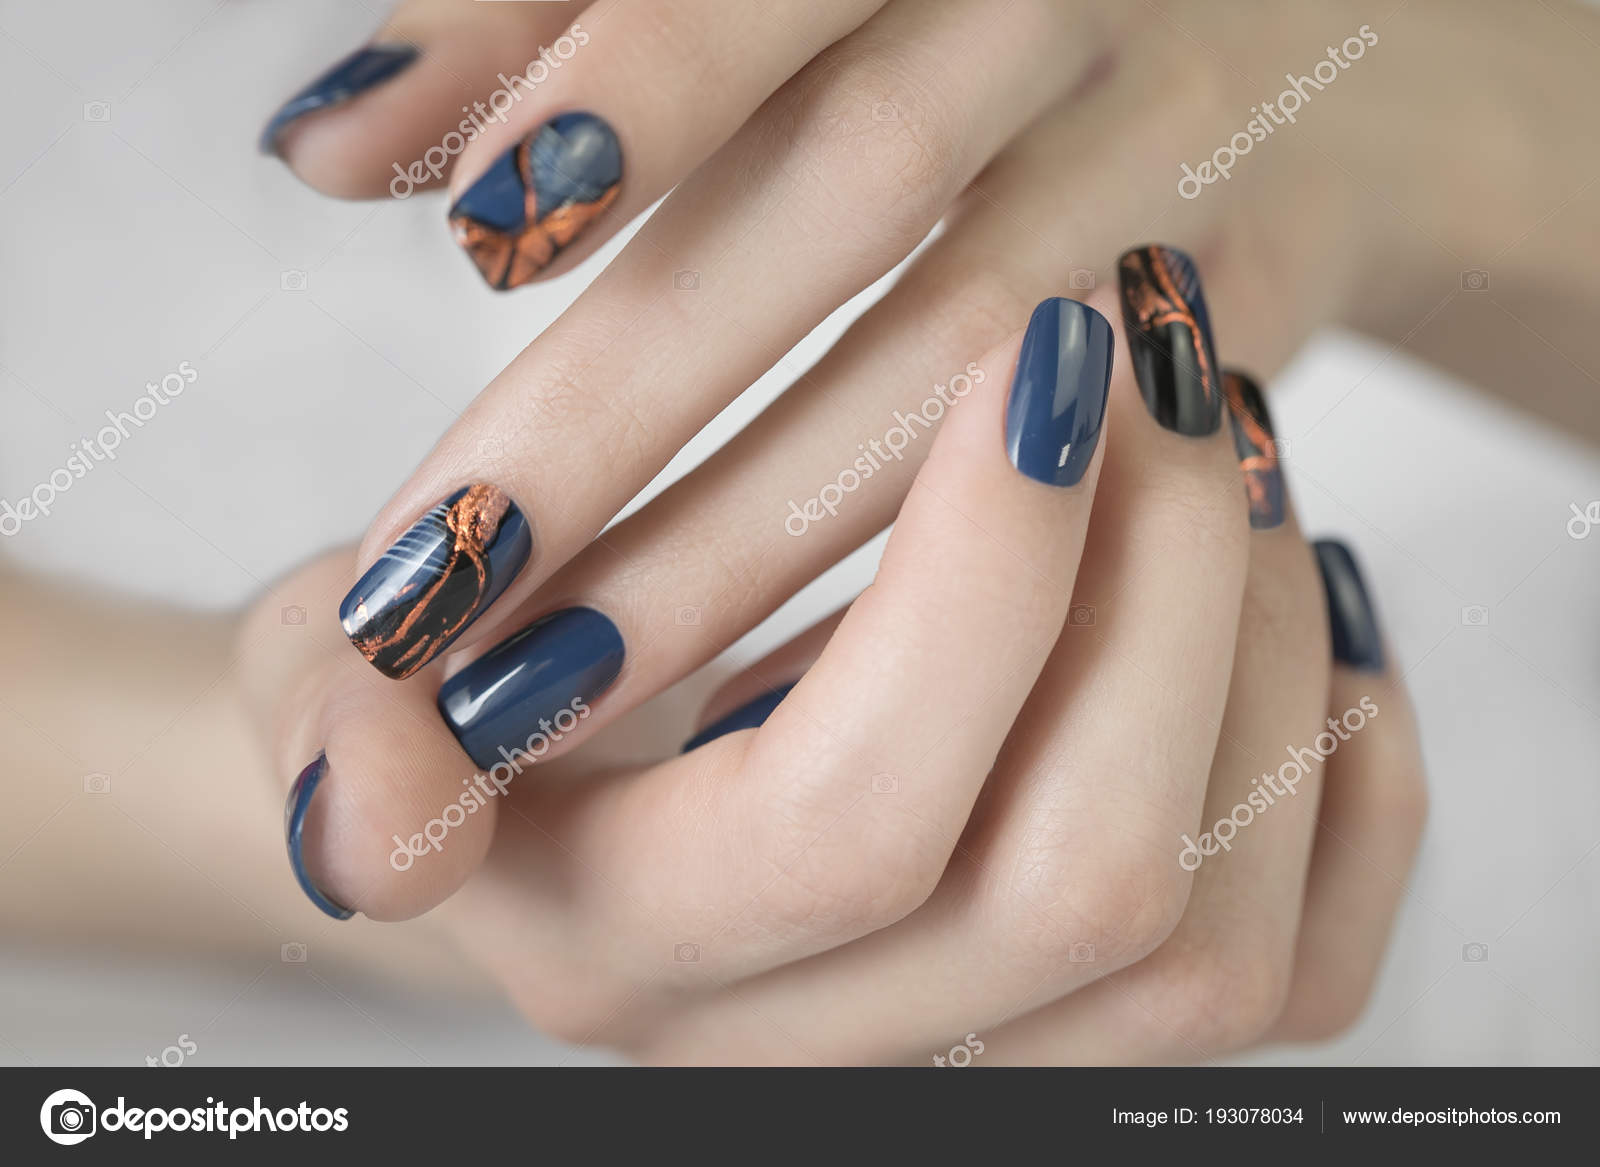 The Top Nail Art Designs for 2022 – America's Beauty Show®